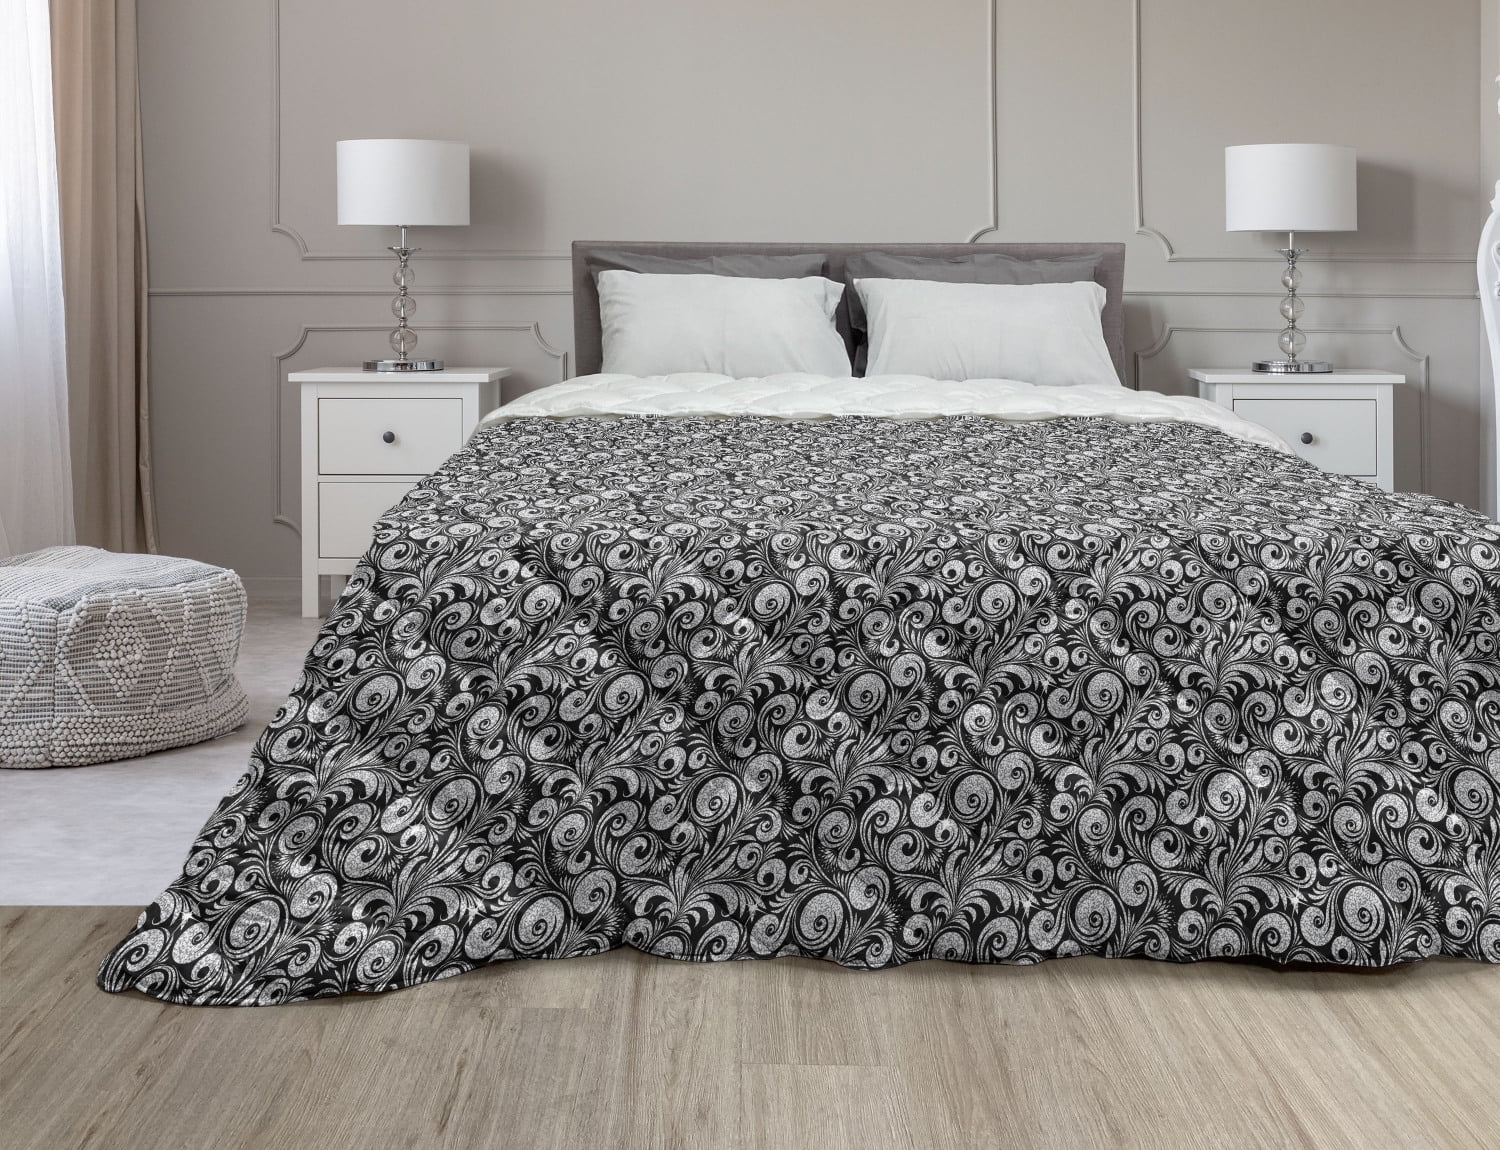 Details about   Ambesonne Absurd Pattern Flat Sheet Top Sheet Decorative Bedding 6 Sizes 